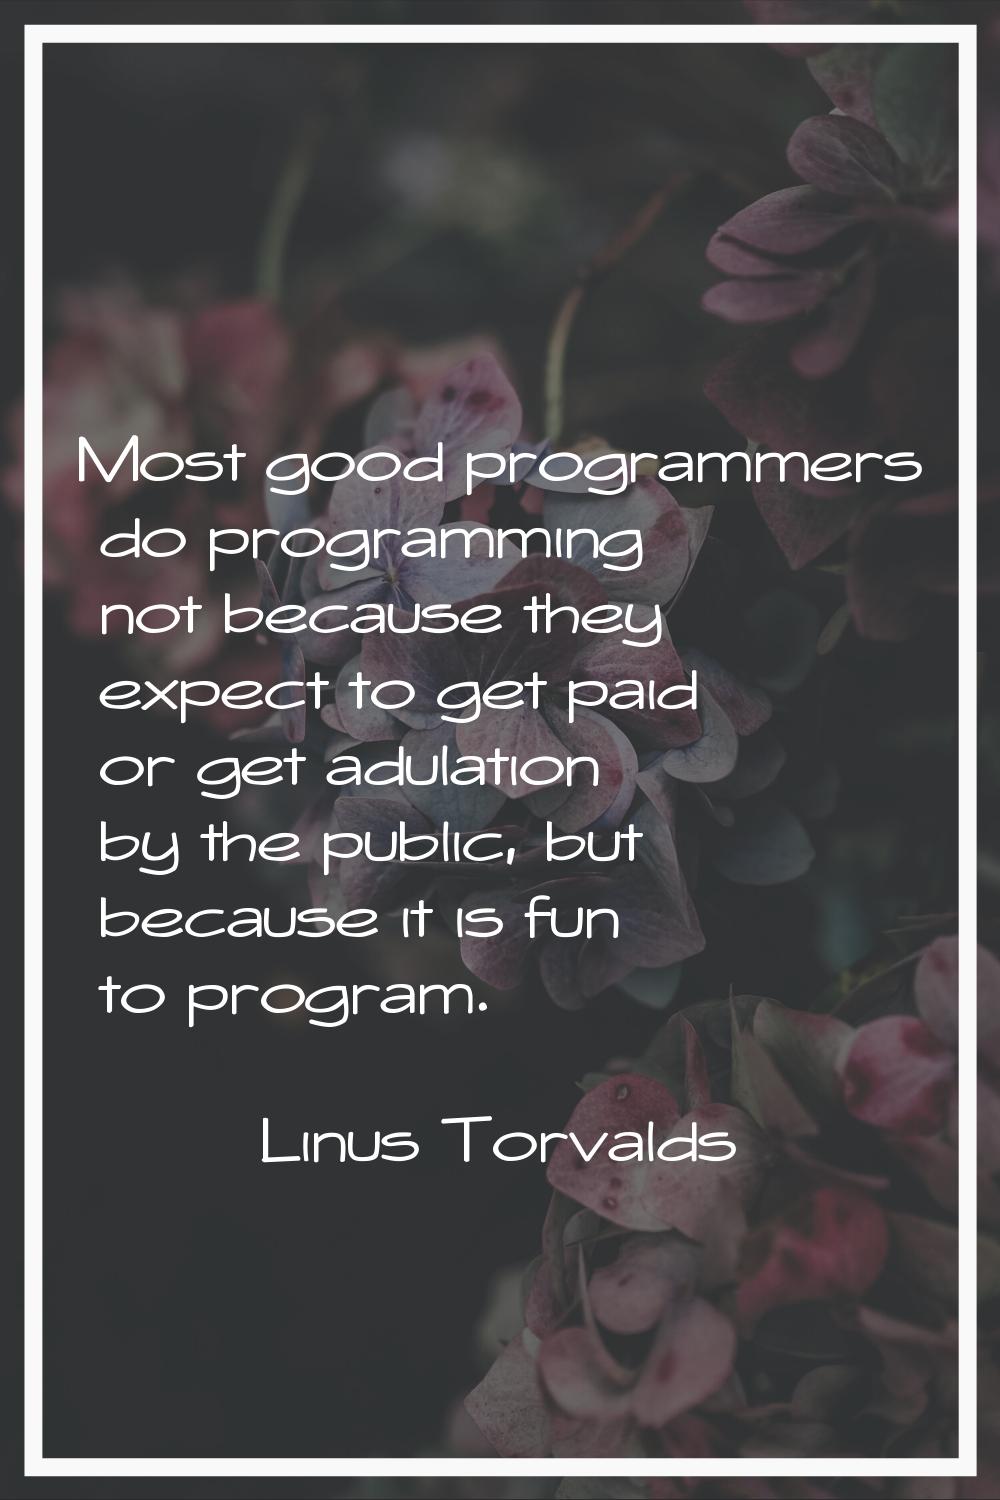 Most good programmers do programming not because they expect to get paid or get adulation by the pu